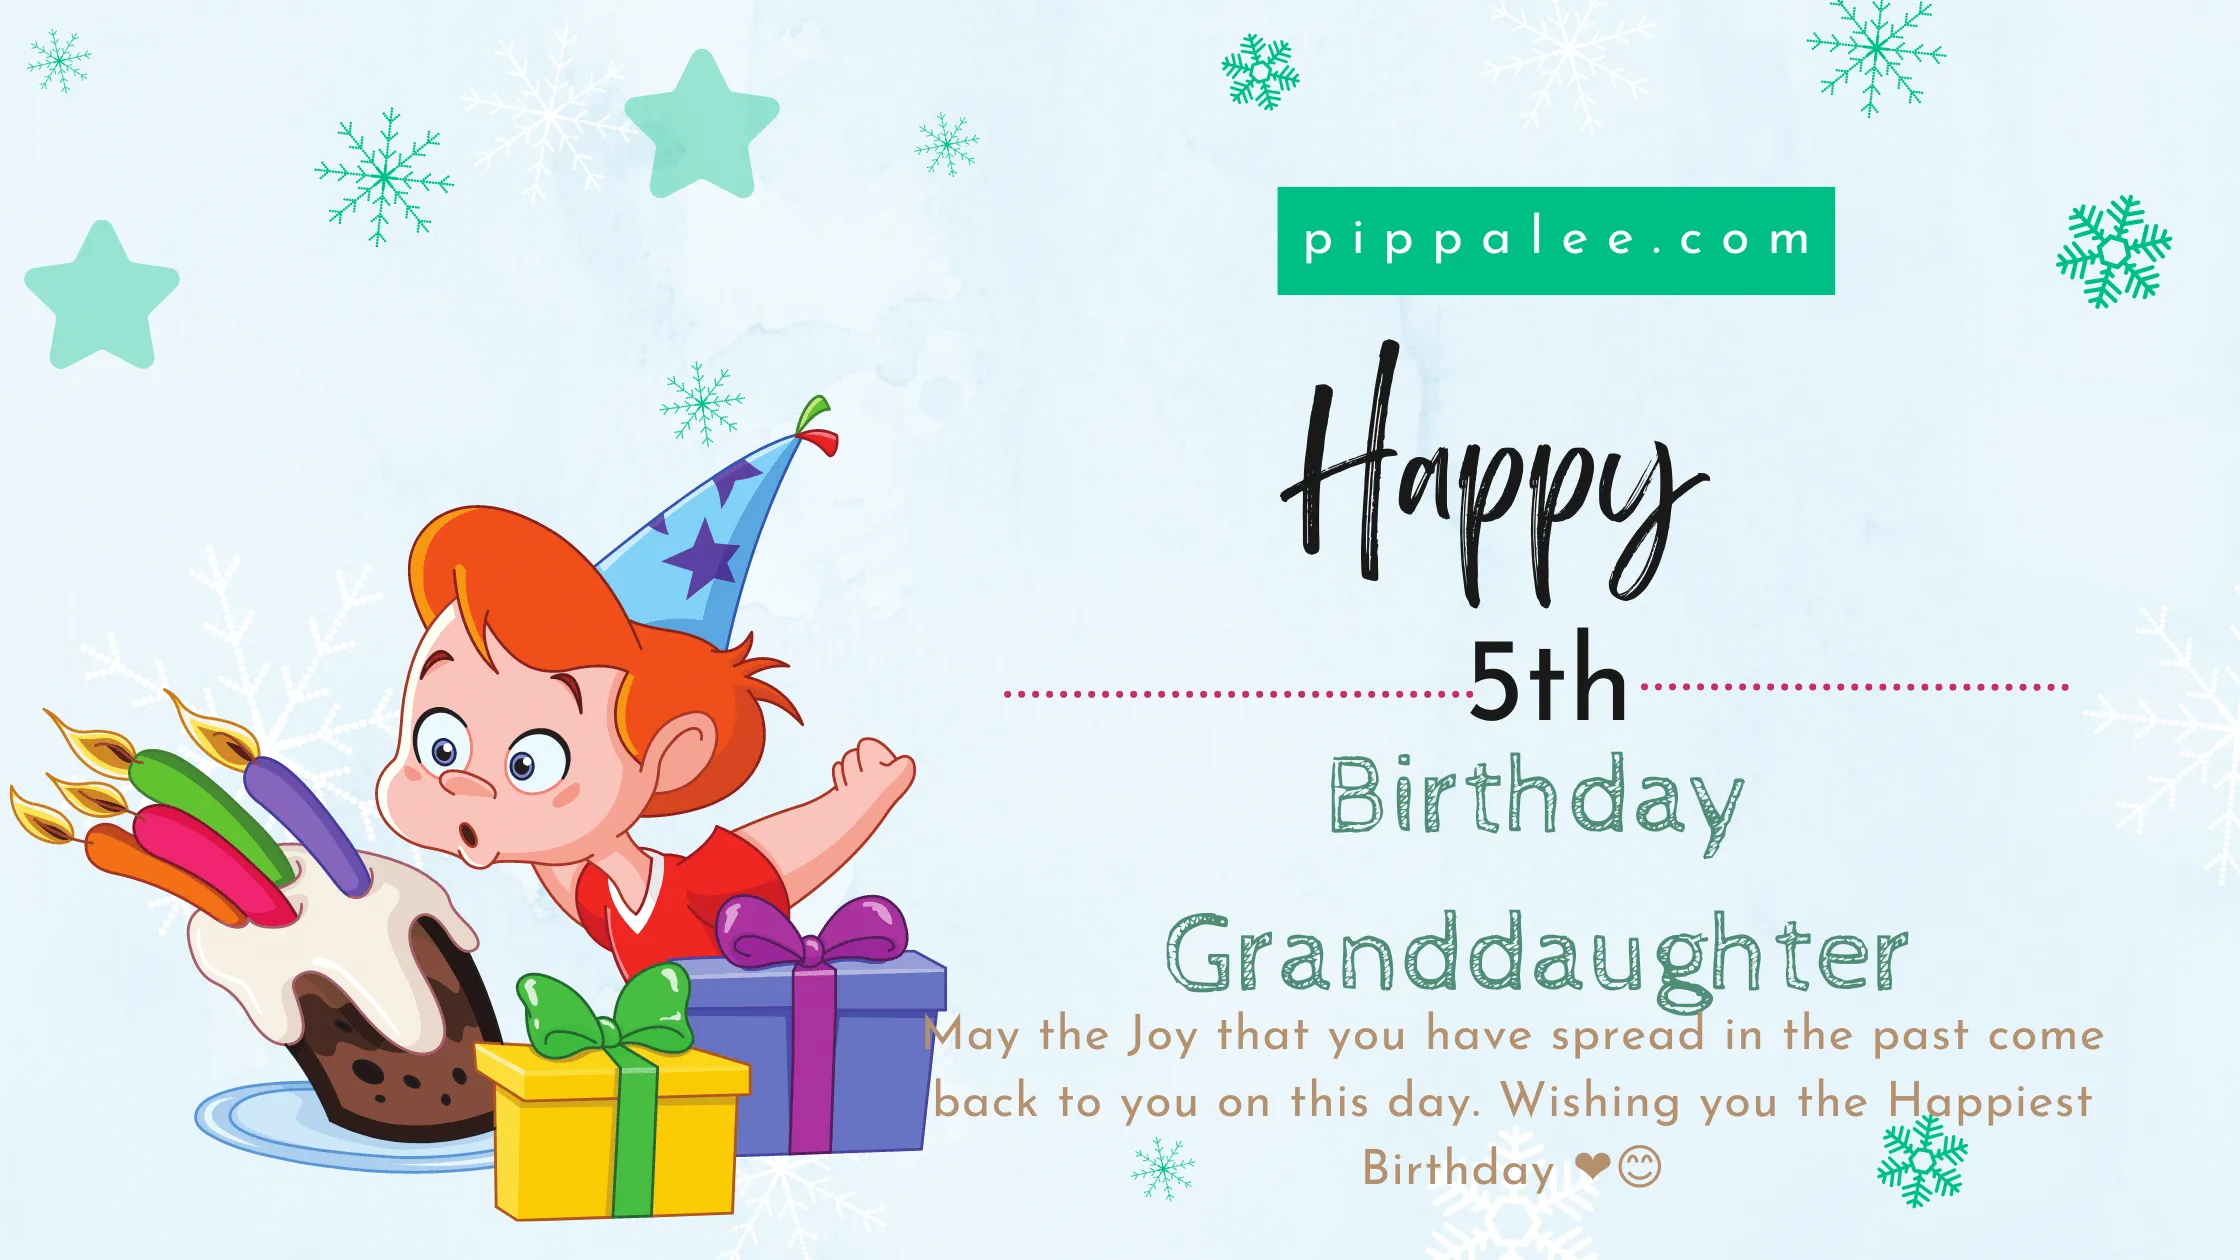 Happy 5th Birthday Granddaughter - Wishes & Messages